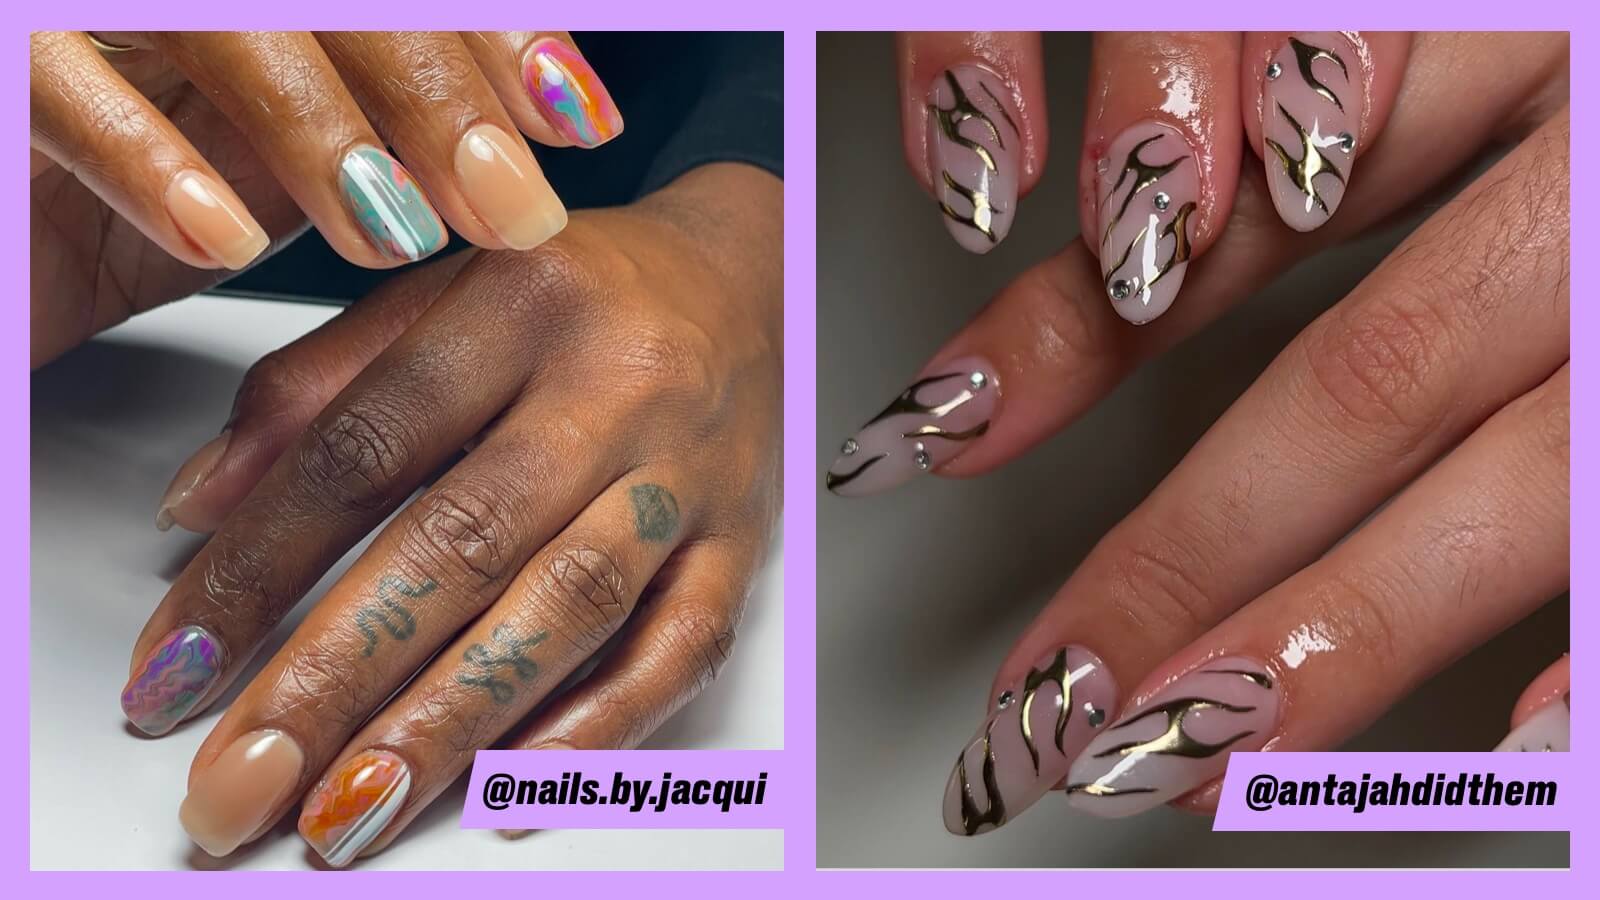 The 45 pretty nail art designs that perfect for spring looks 4